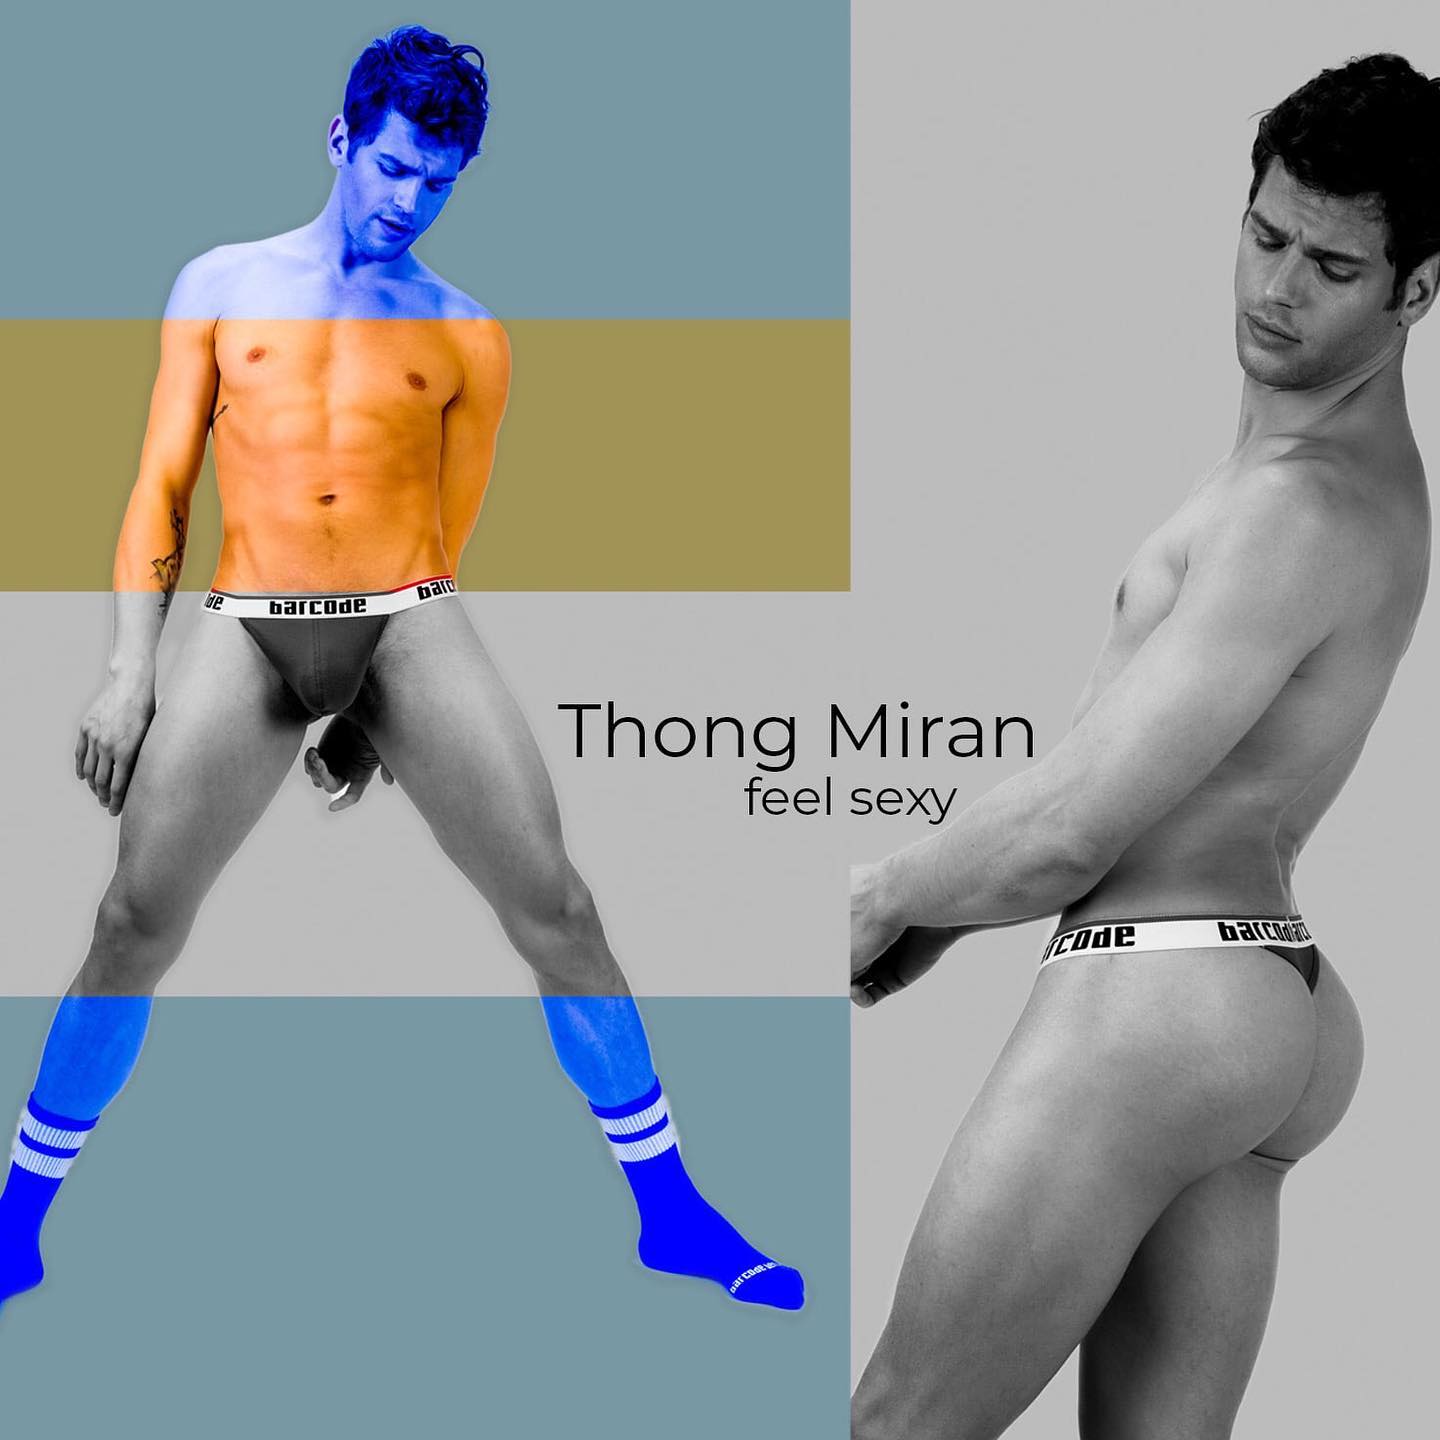 Read all about the new and limited edition Thongs Miran by Barcode Berlin, just released and bound to become best sellers!
___
http://www.menandunderwear.com/2022/01/a-limited-edition-line-of-thongs-called-miran-just-released-by-barcode-berlin.html